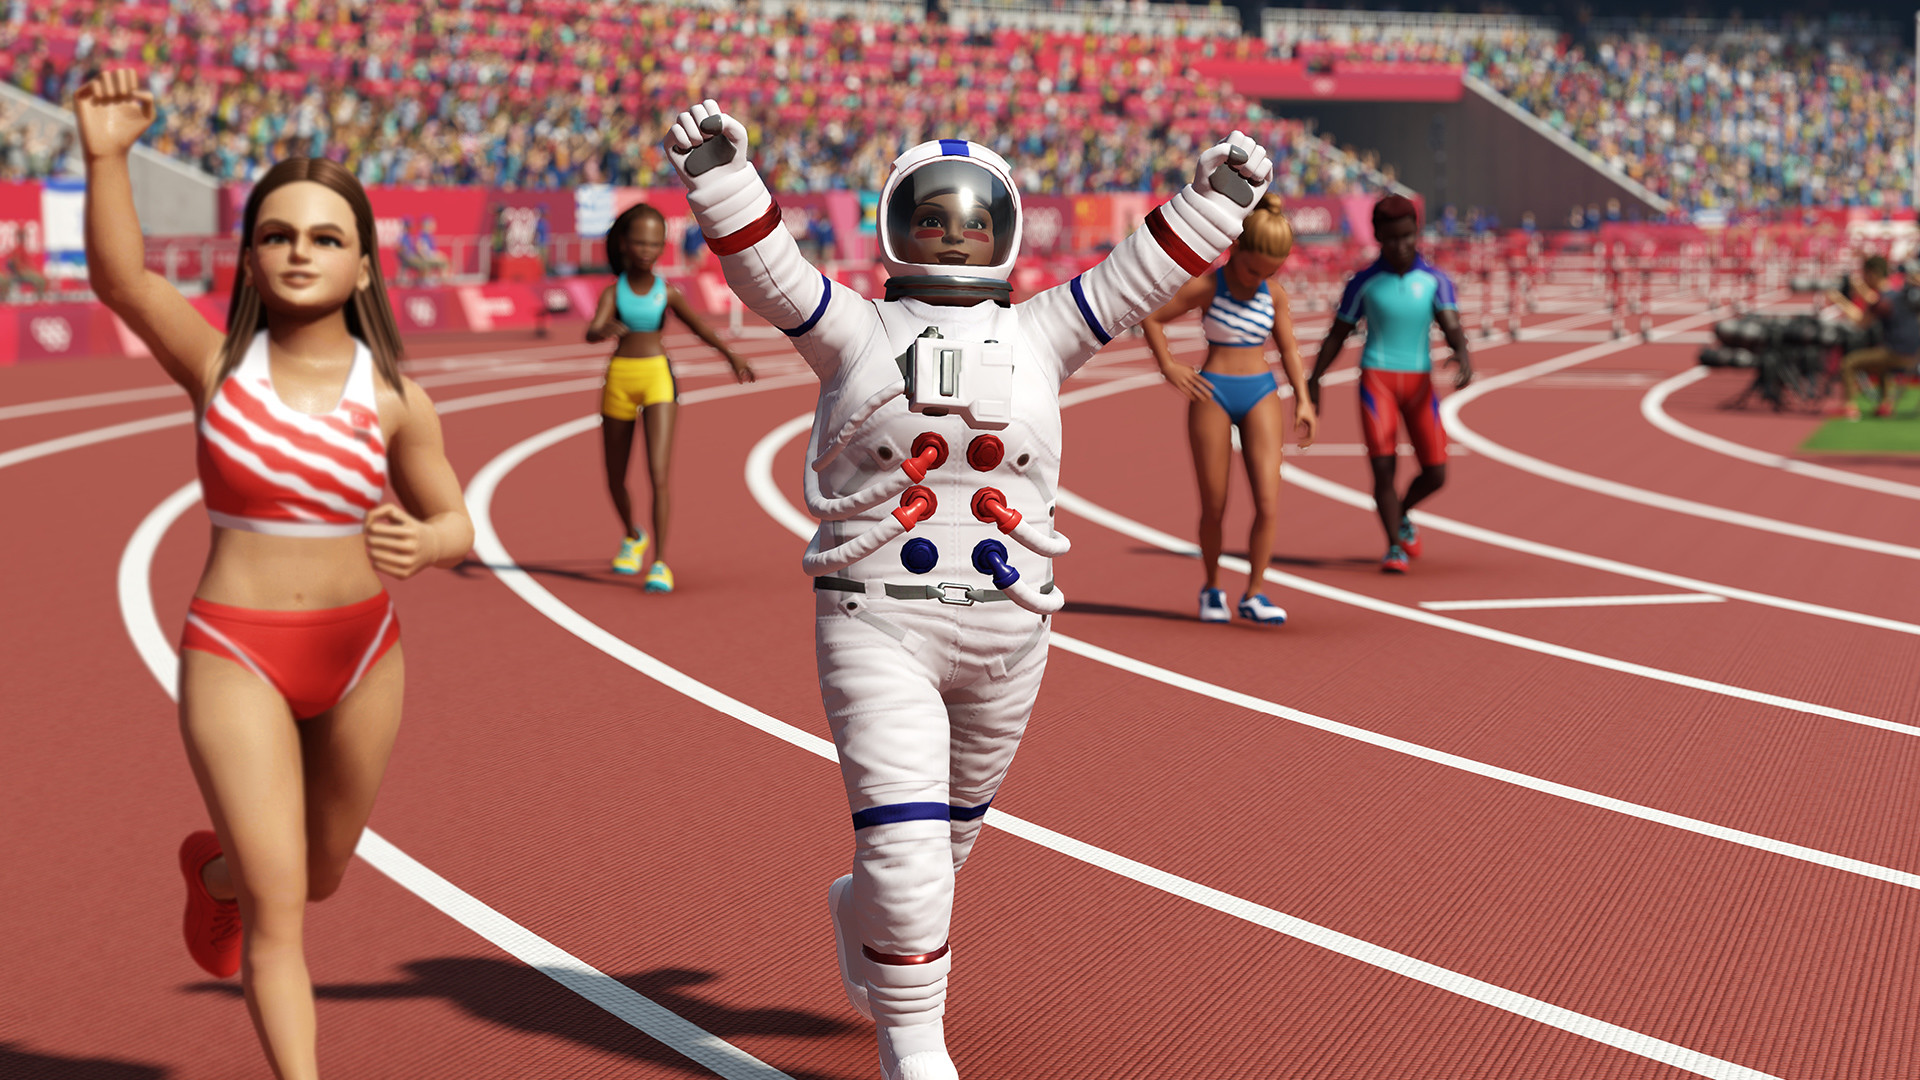 Olympic Games Tokyo 2020 - The Official Video Game EU Steam CD Key 9.45 $